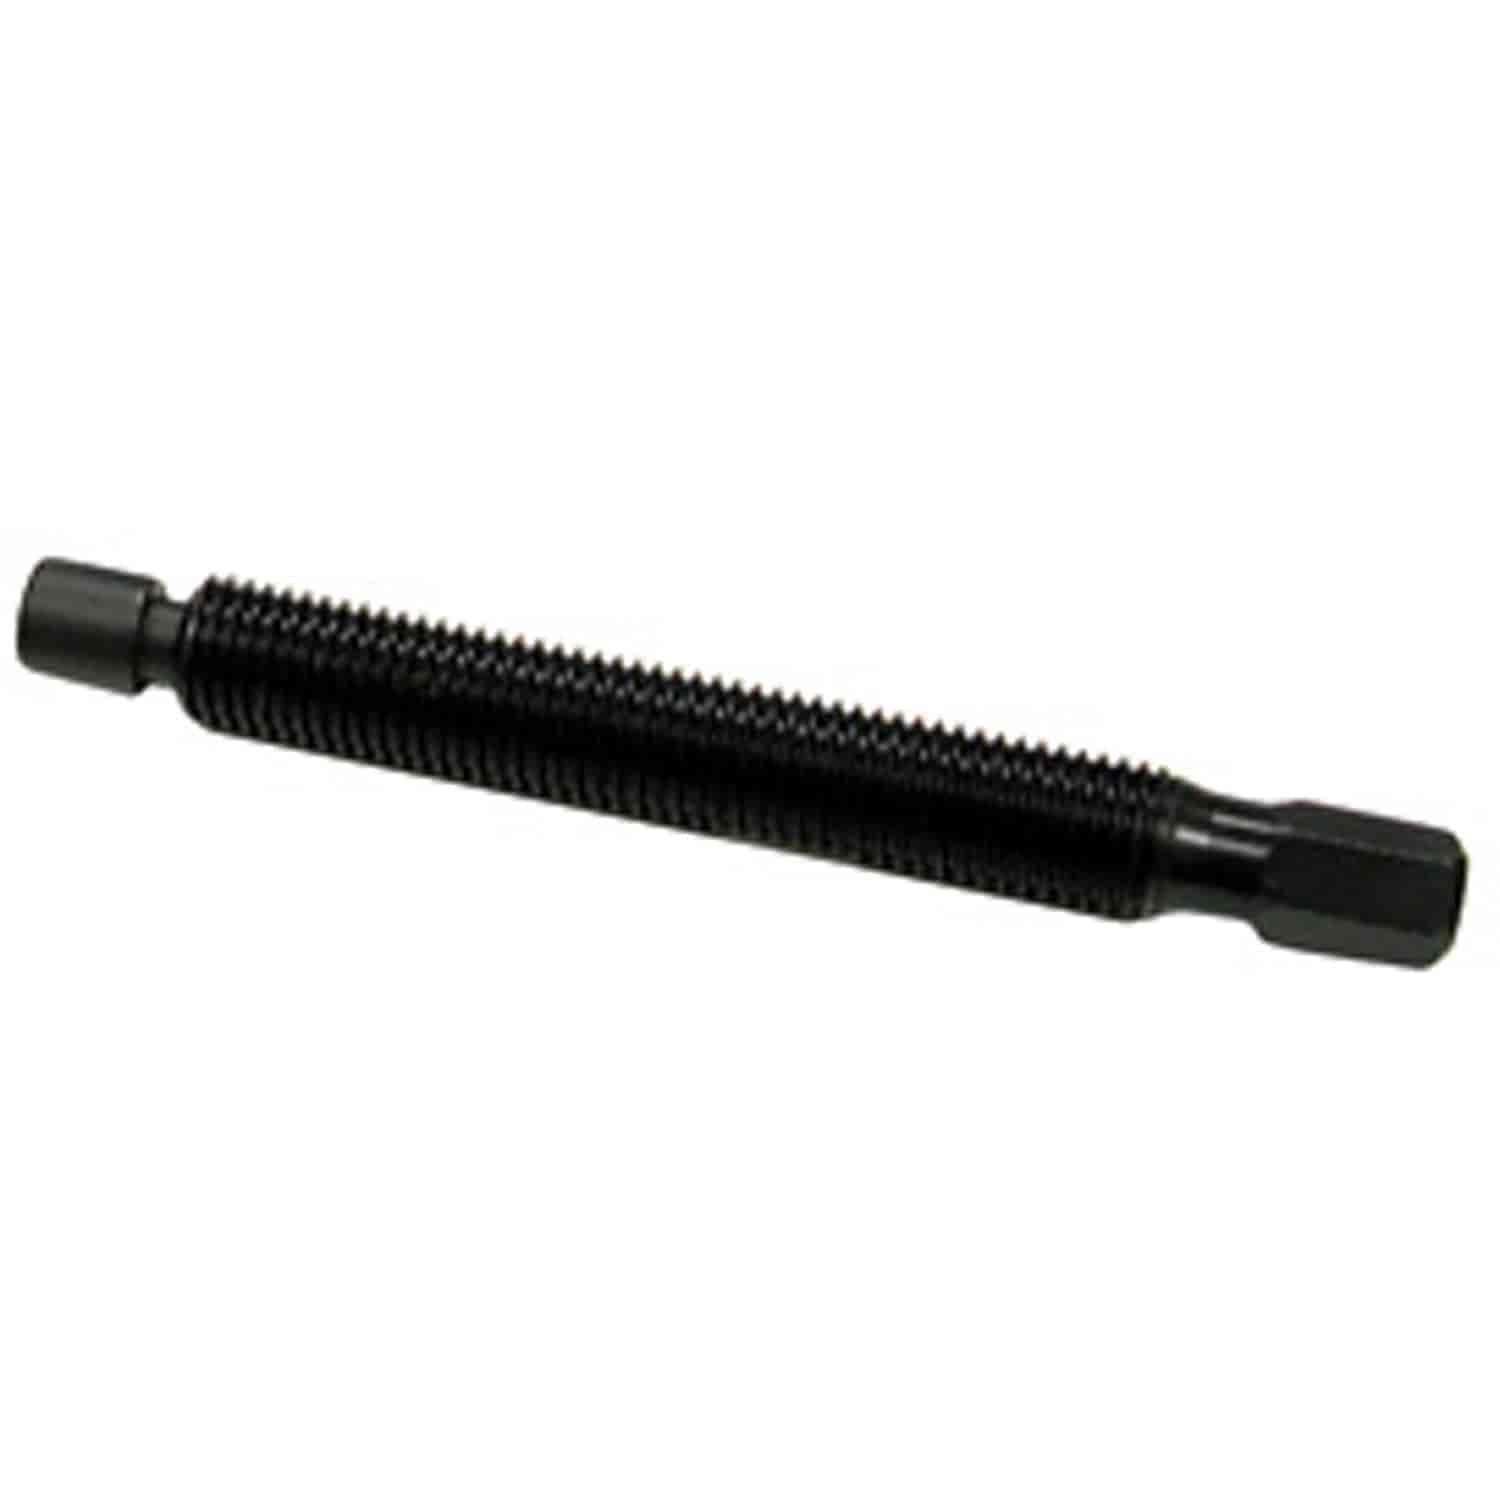 FORCING SCREW FOR 7250